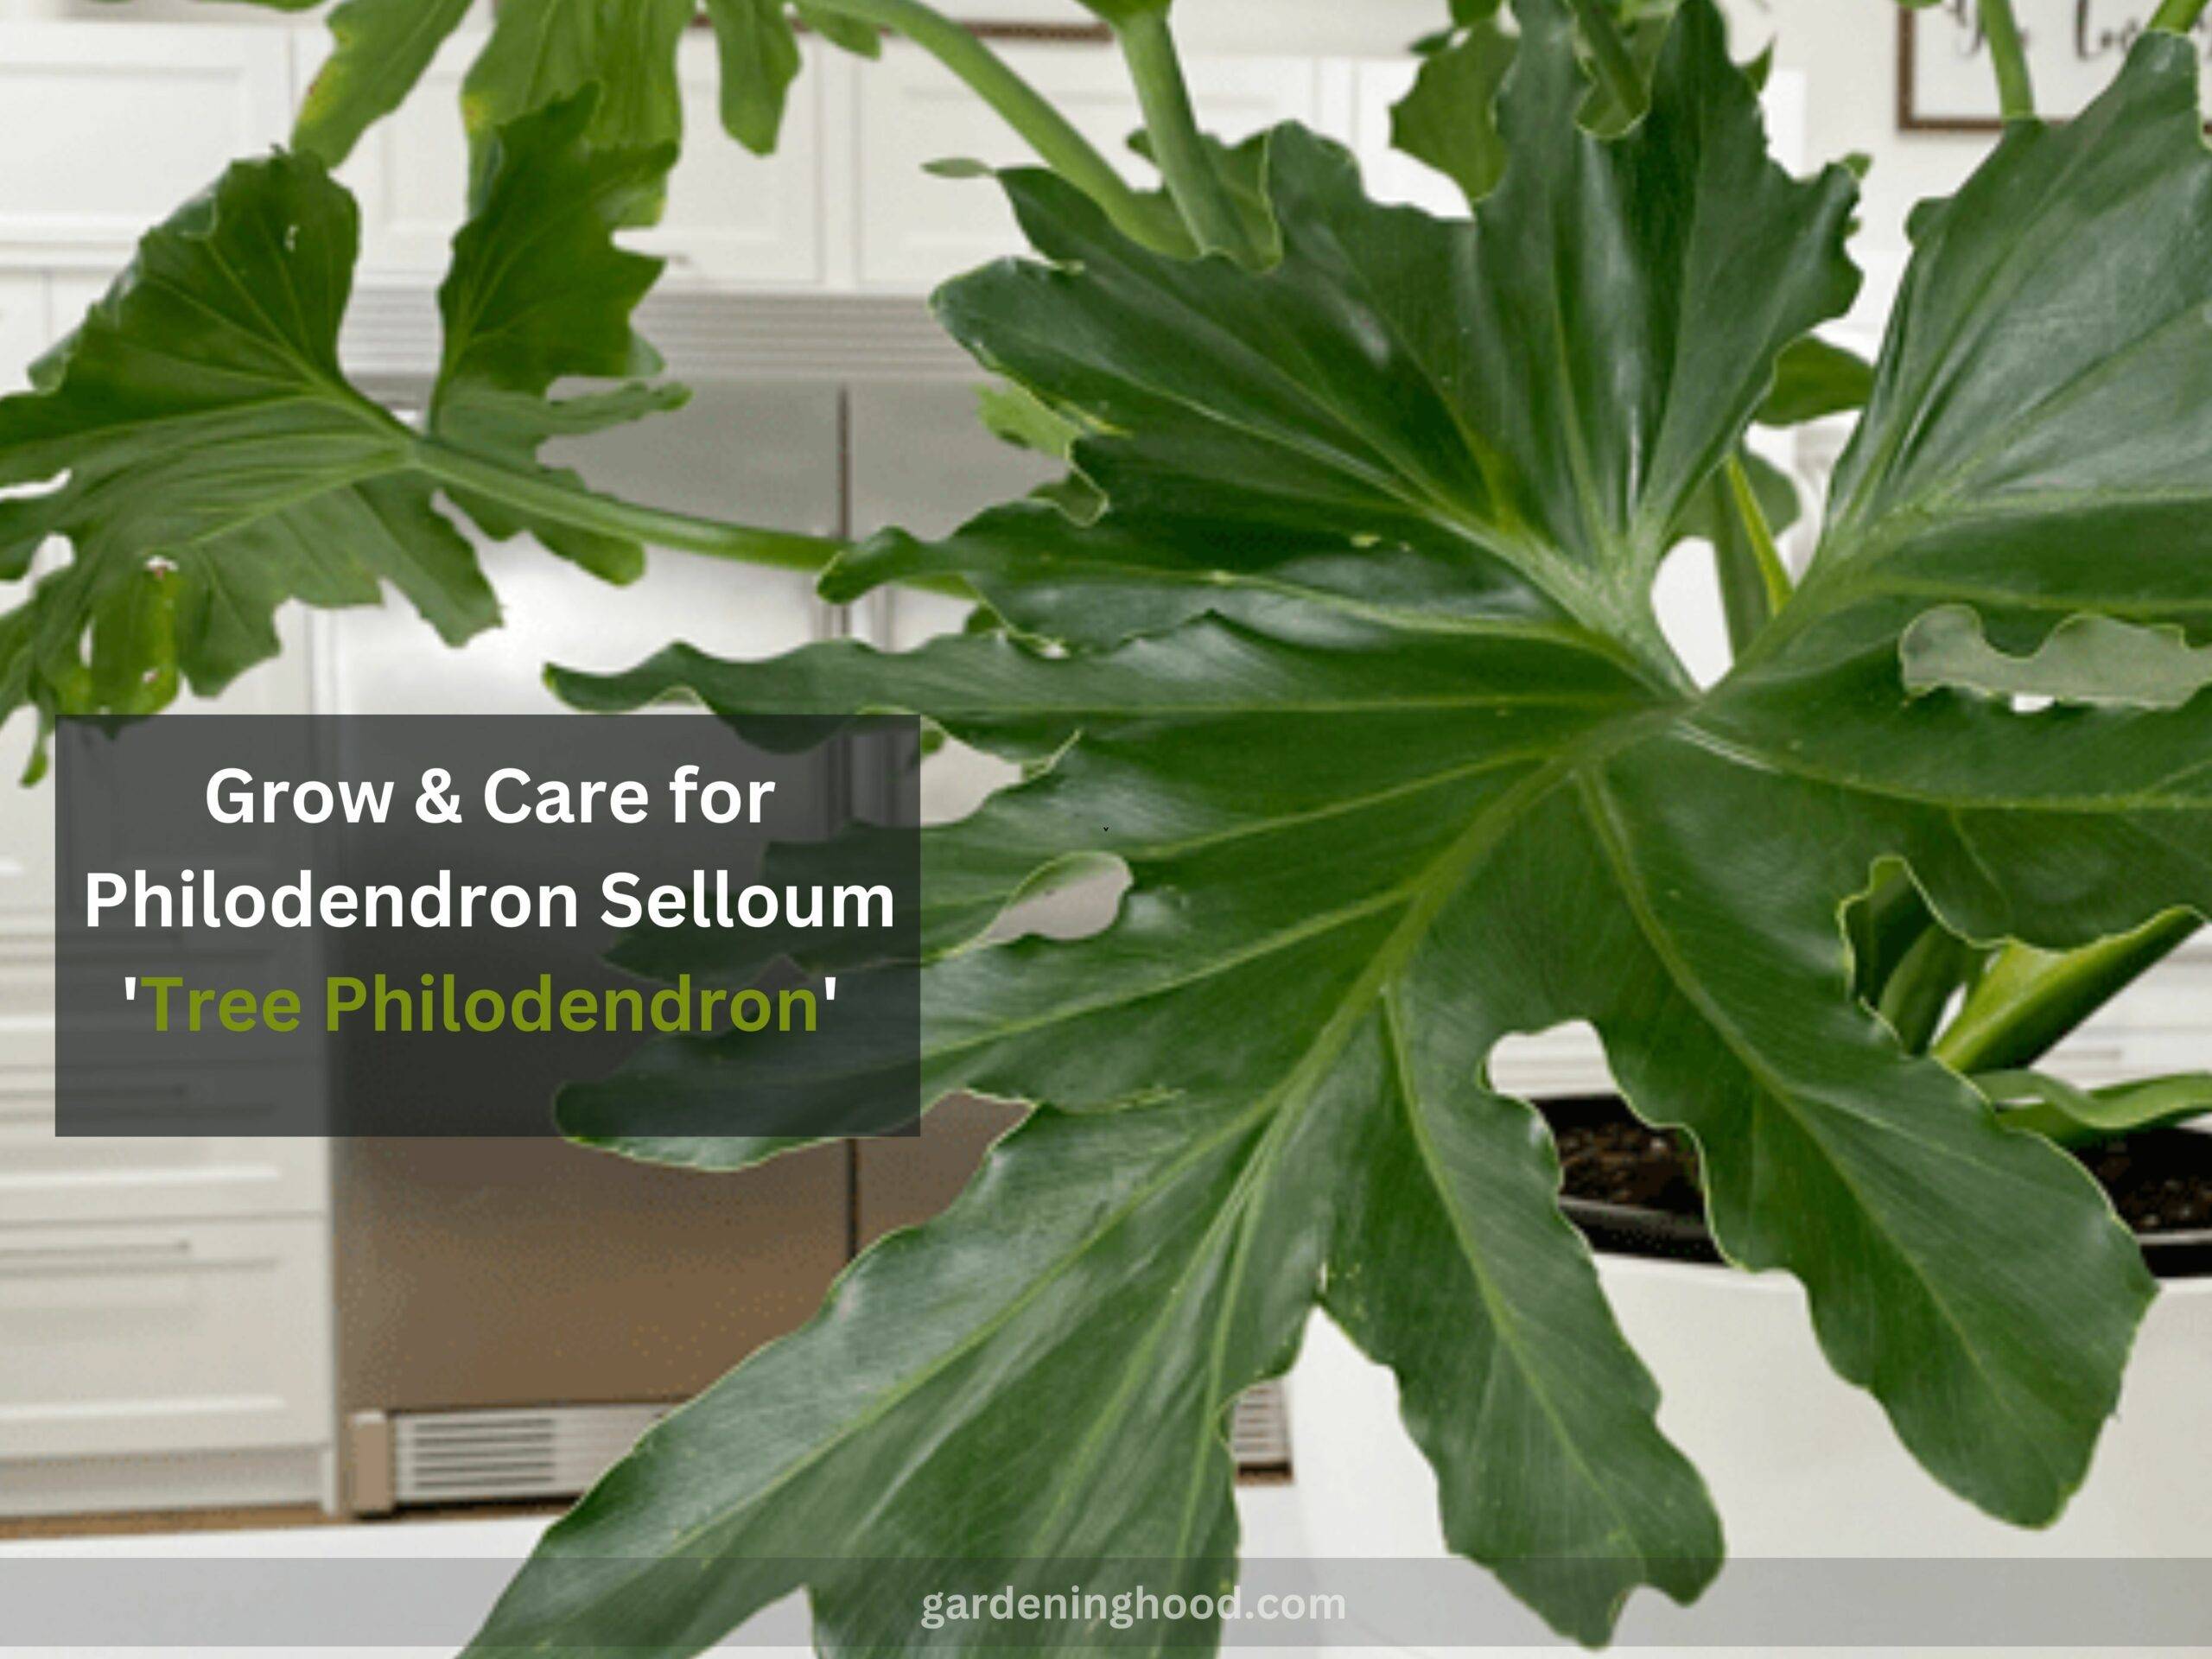 How to Grow & Care for Philodendron Selloum 'Tree Philodendron'